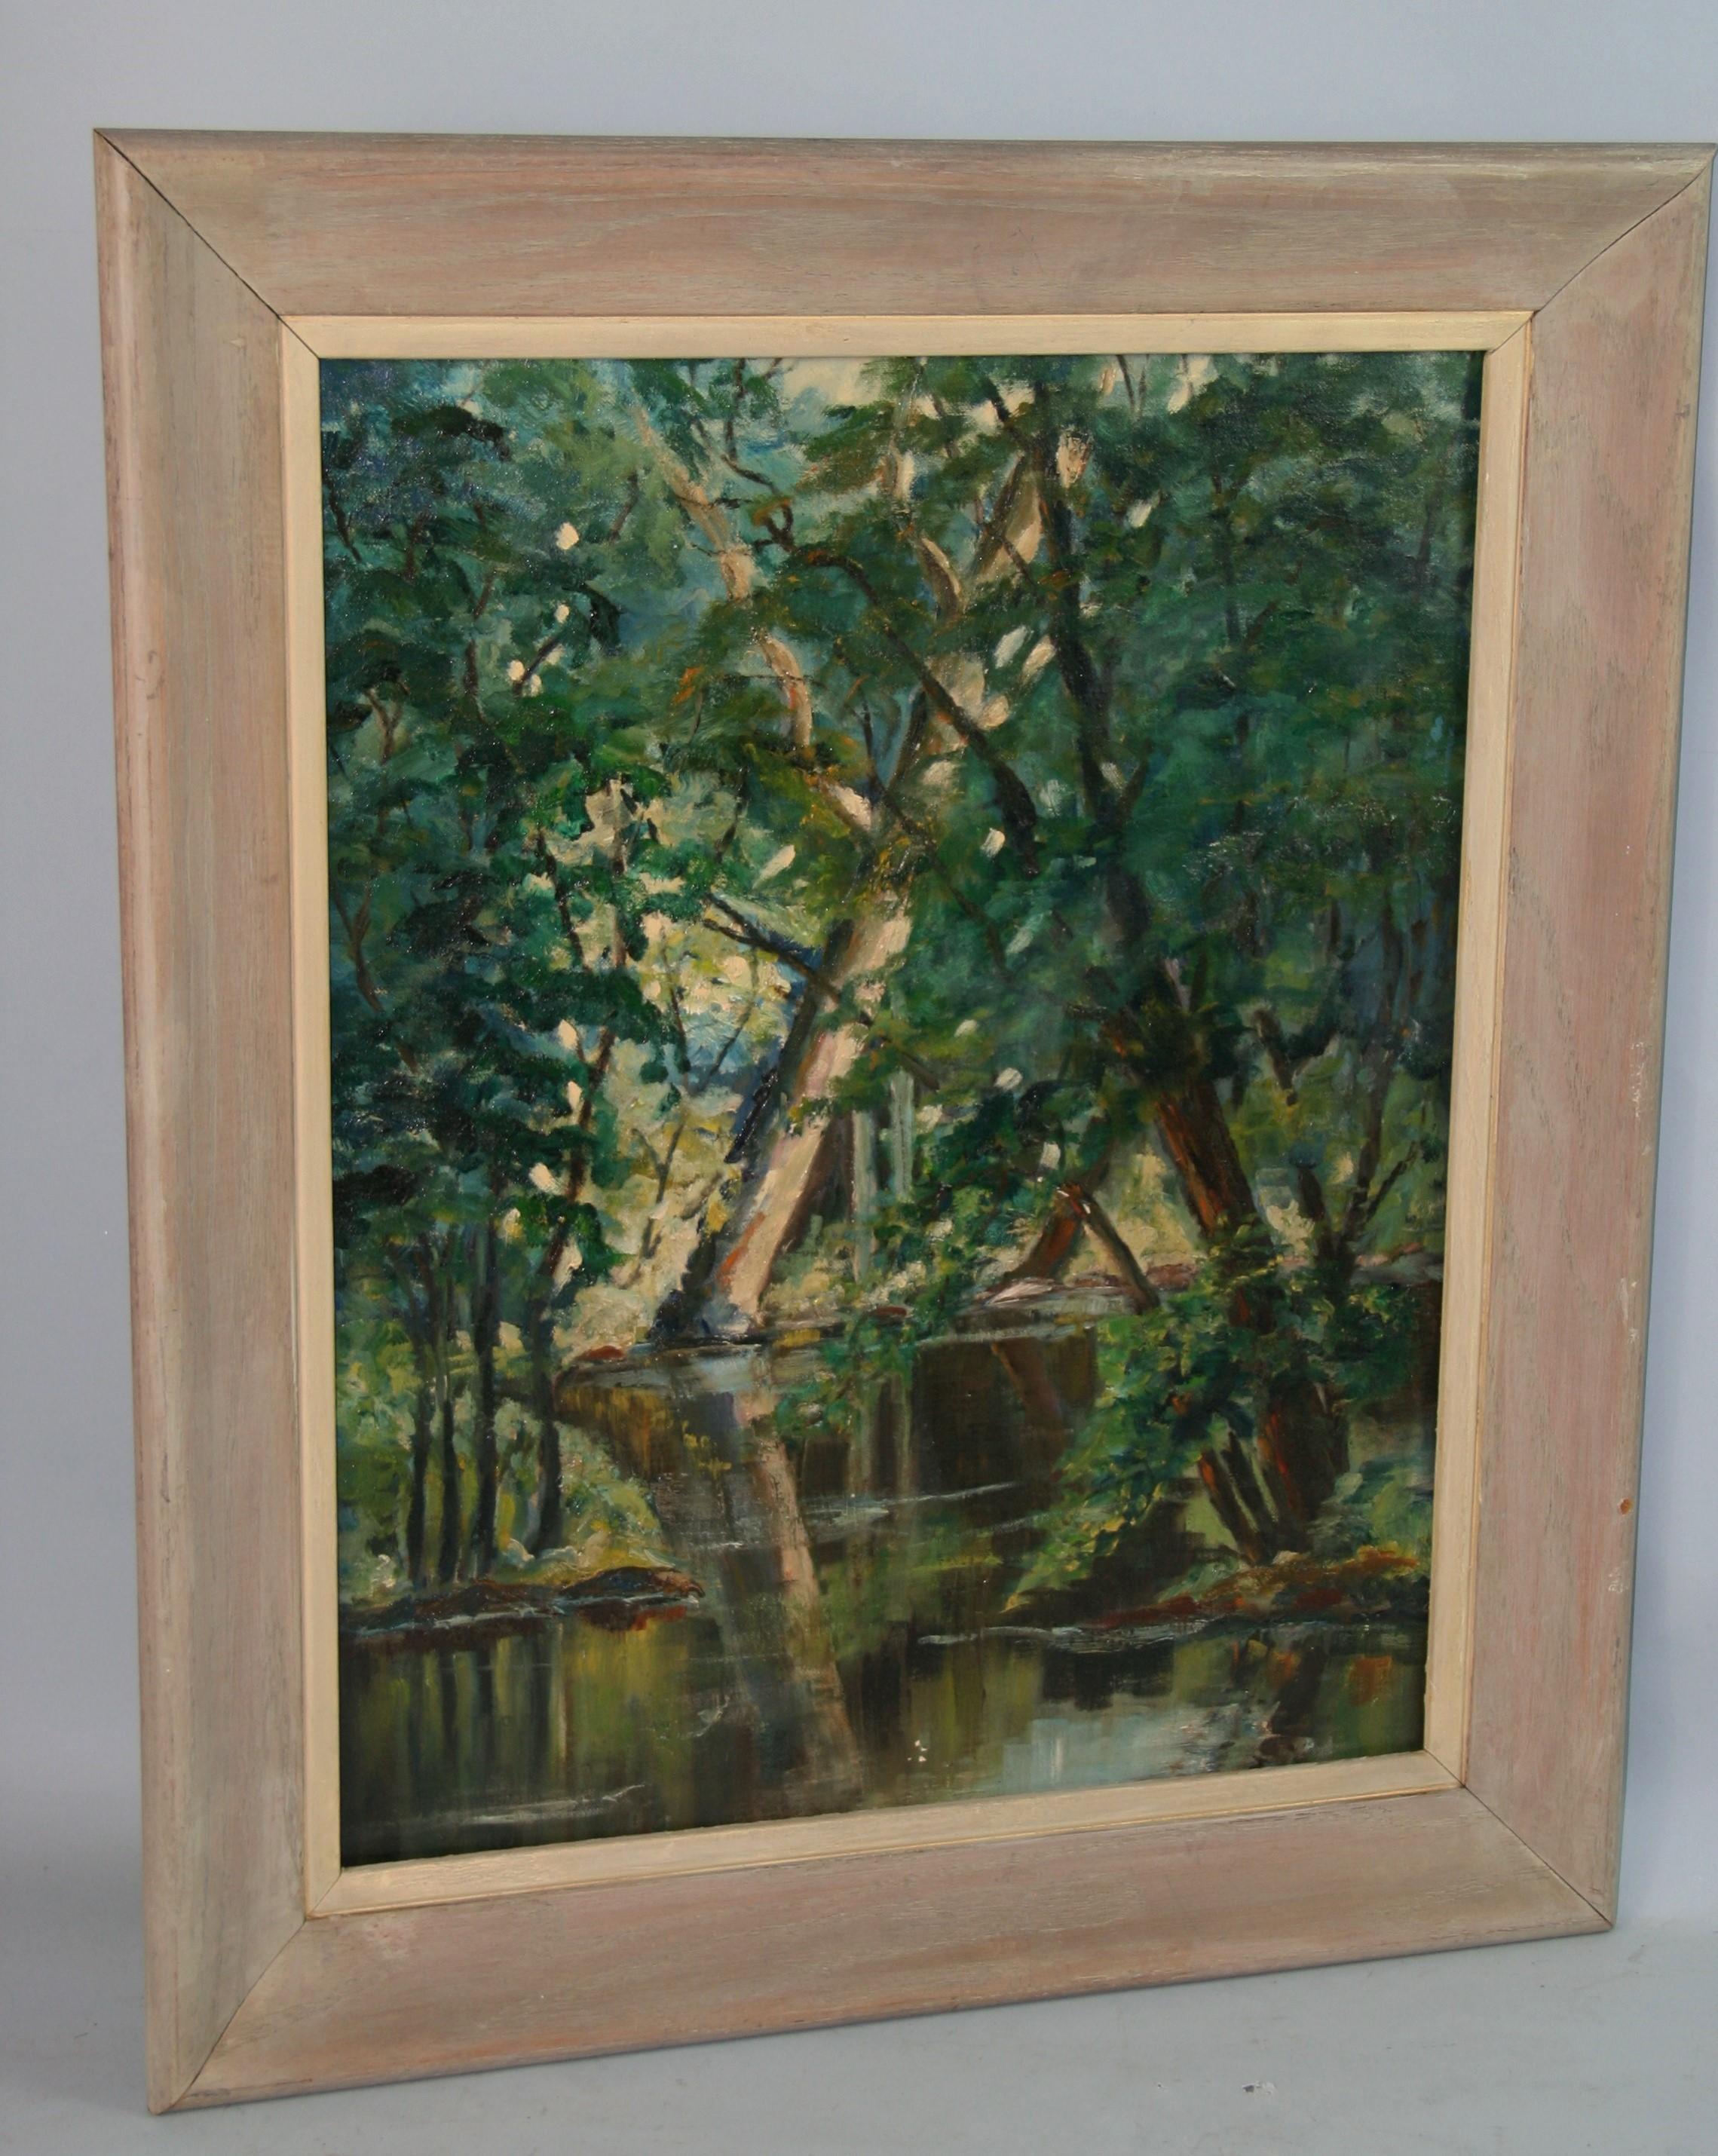 3924 Landscape oil painting on artist board
Set in a pickled oak period frame
Image size 19.5x15.5